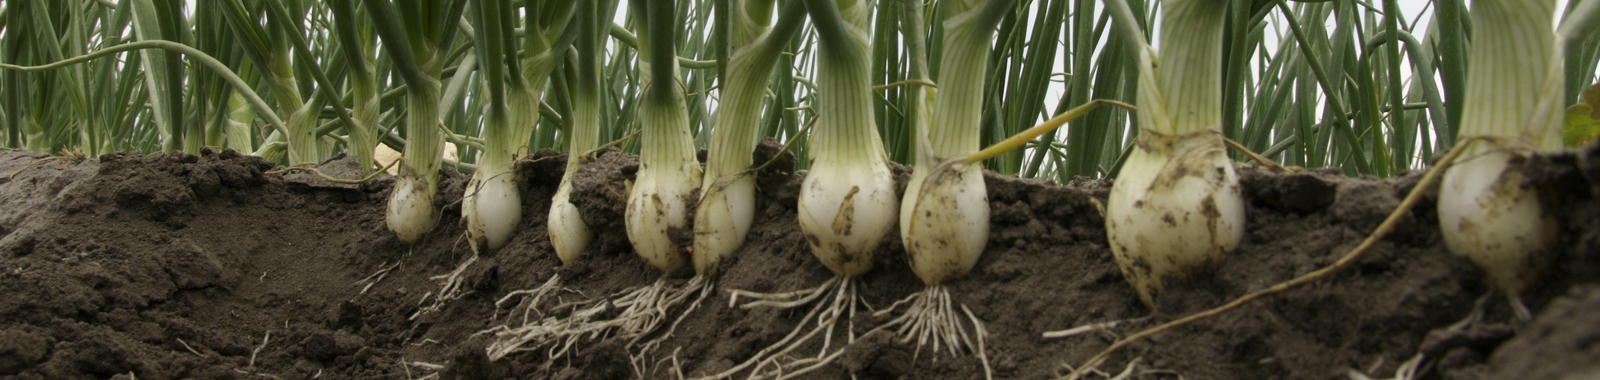 How to increase onion bulb size